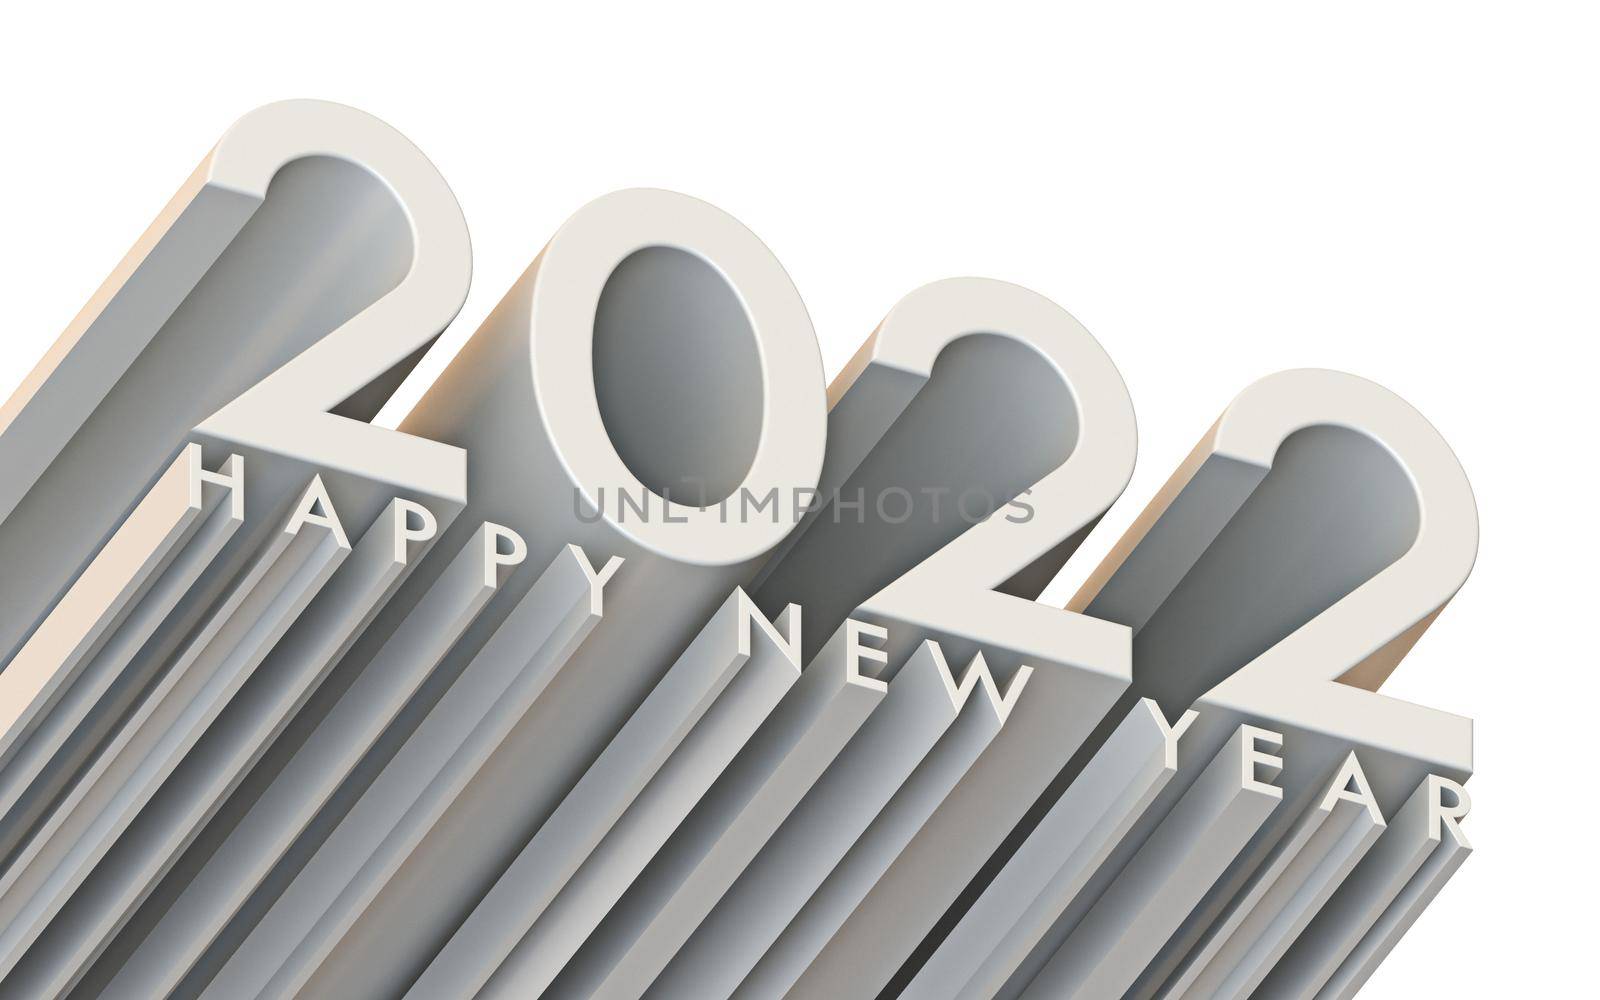 2022 New Year greeting card extruded text 3D rendering 3D illustration